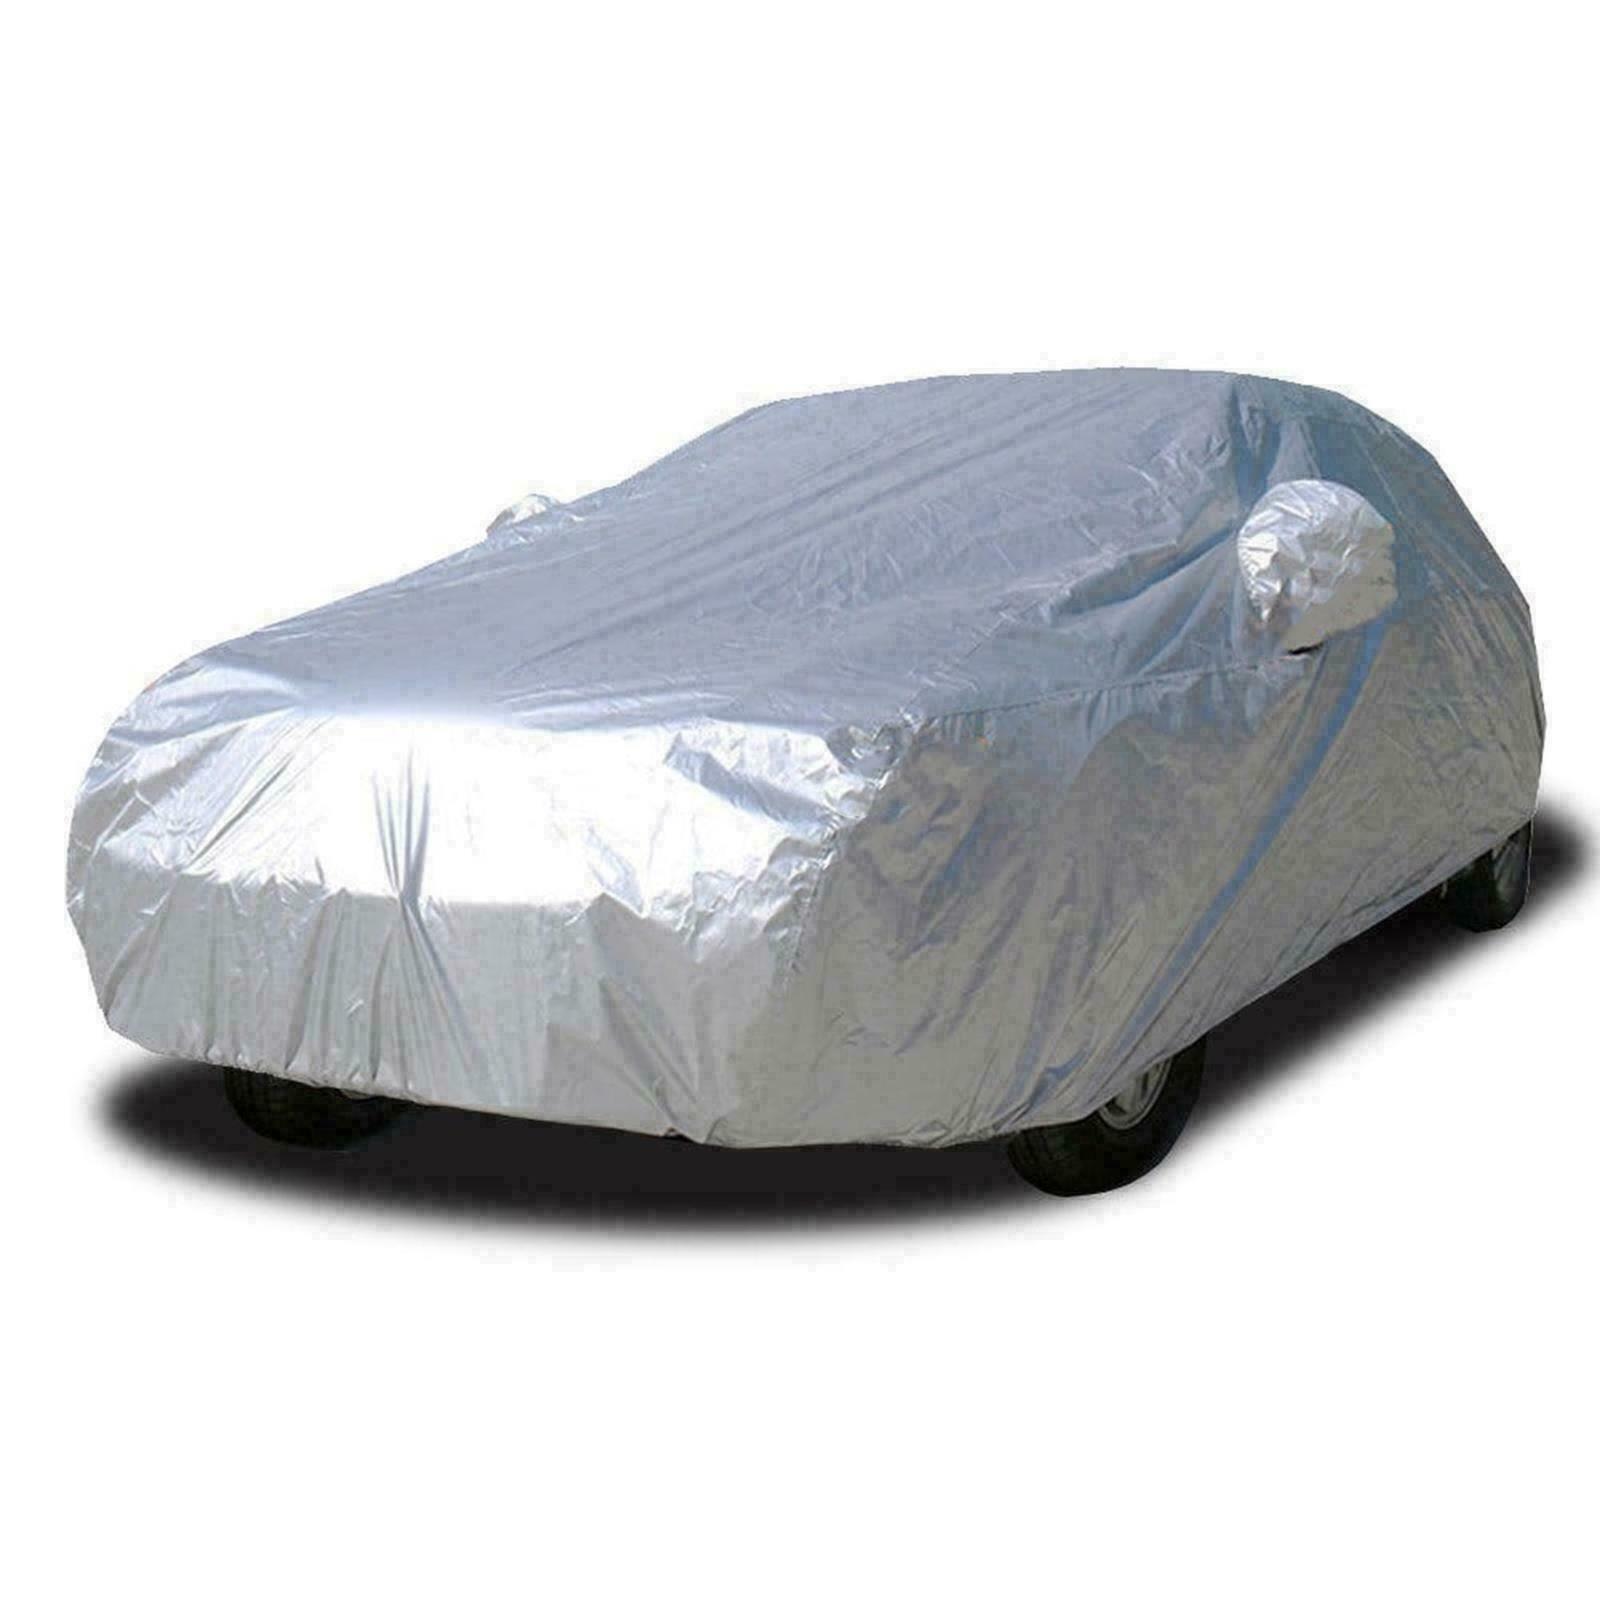 Ozoffer L Car Cover UV Resistance Anti Scratch Dust Dirt Full Protection